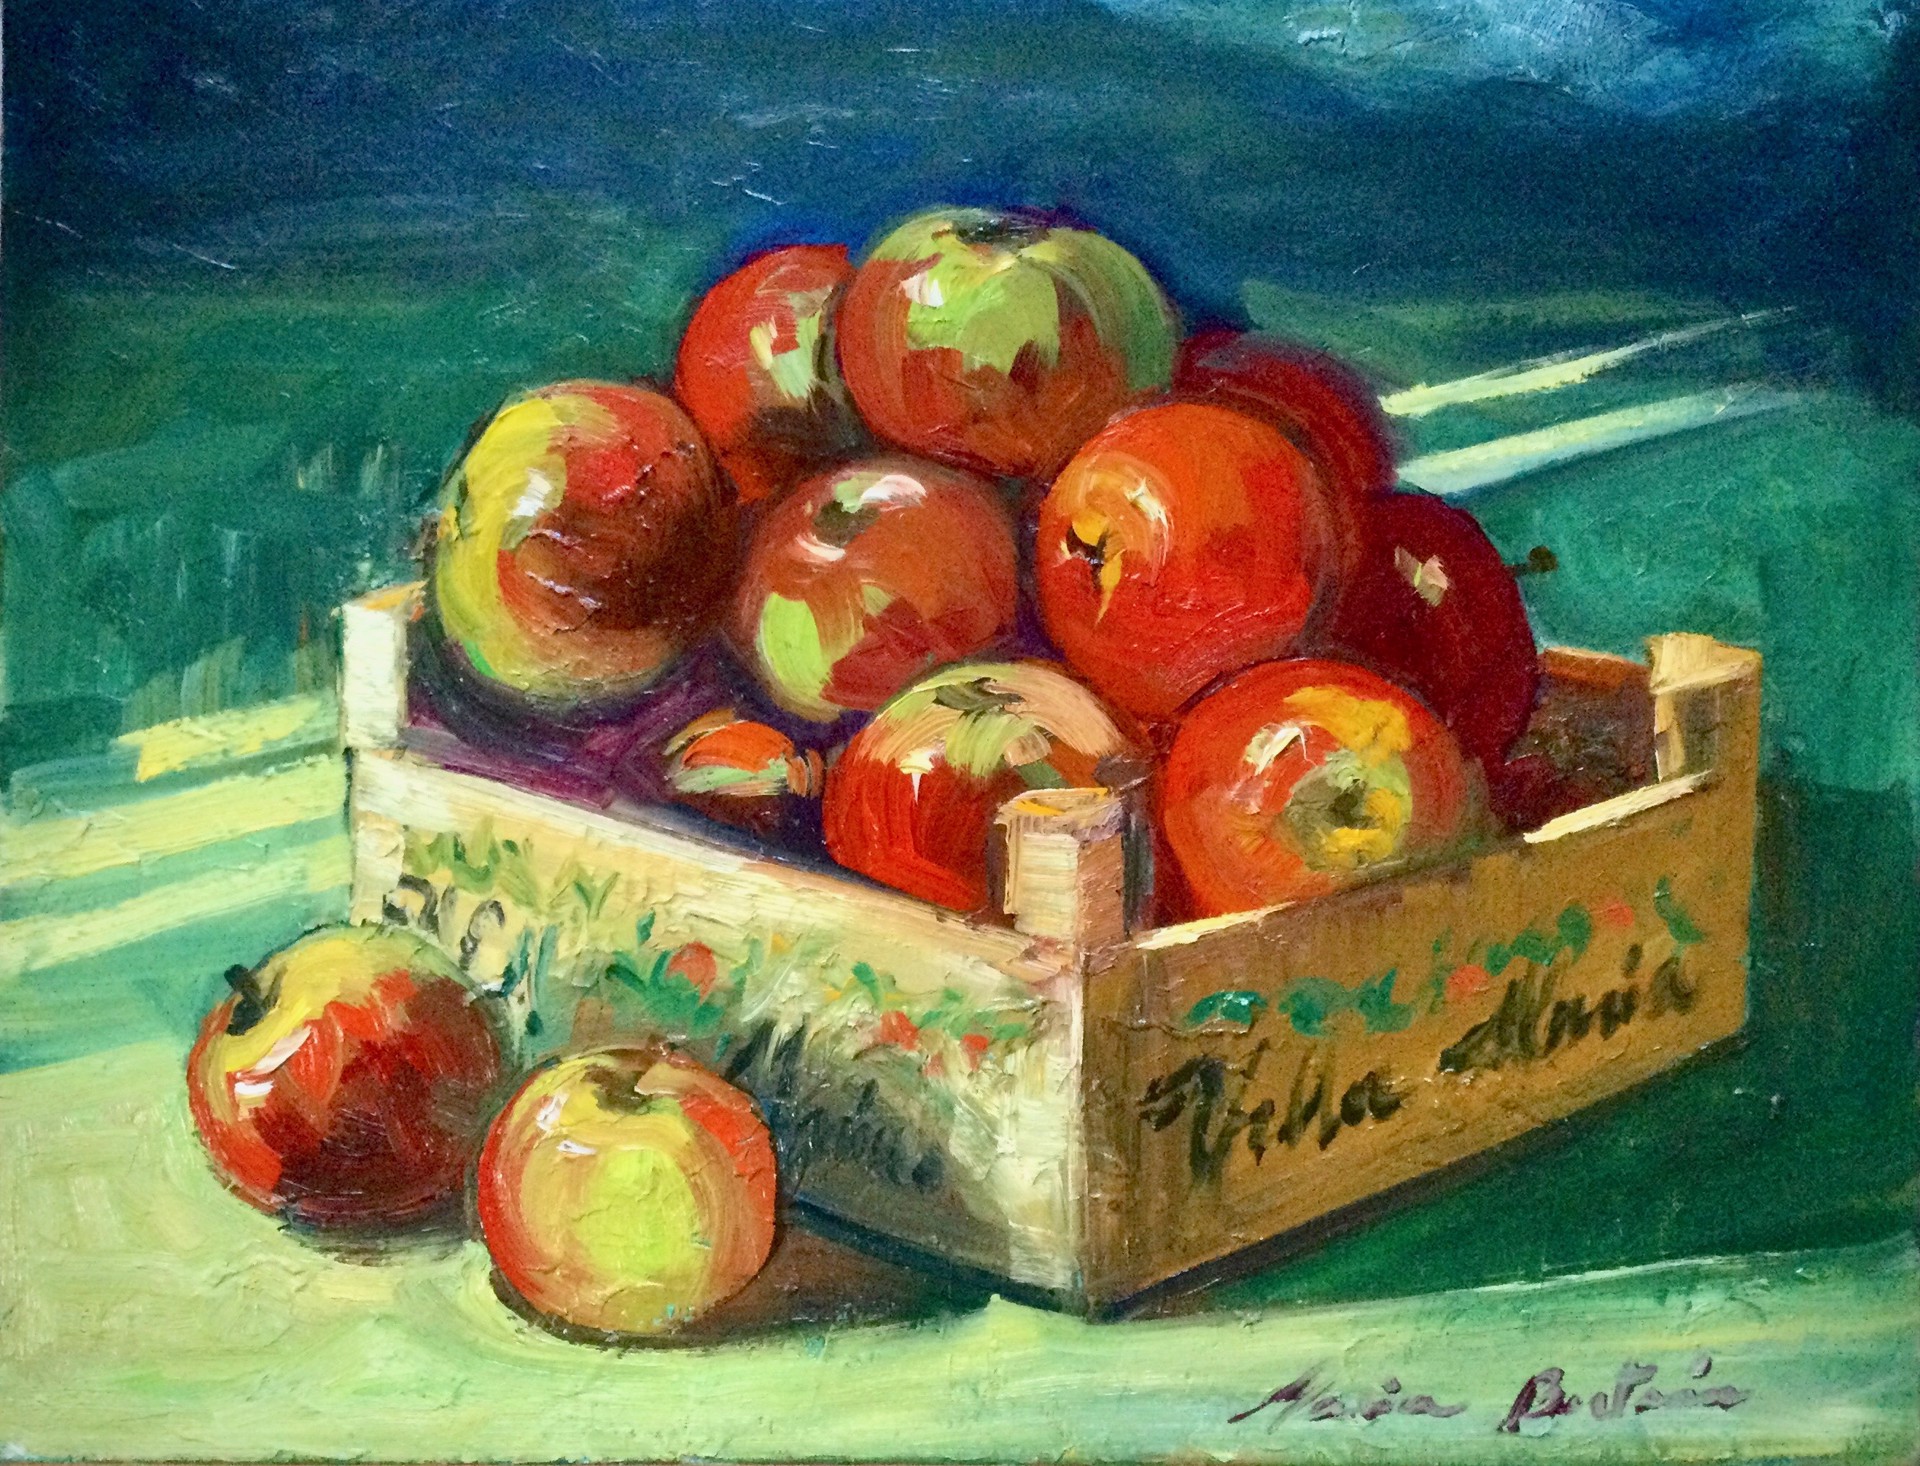 Crate Full of Apples by Maria Bertrán